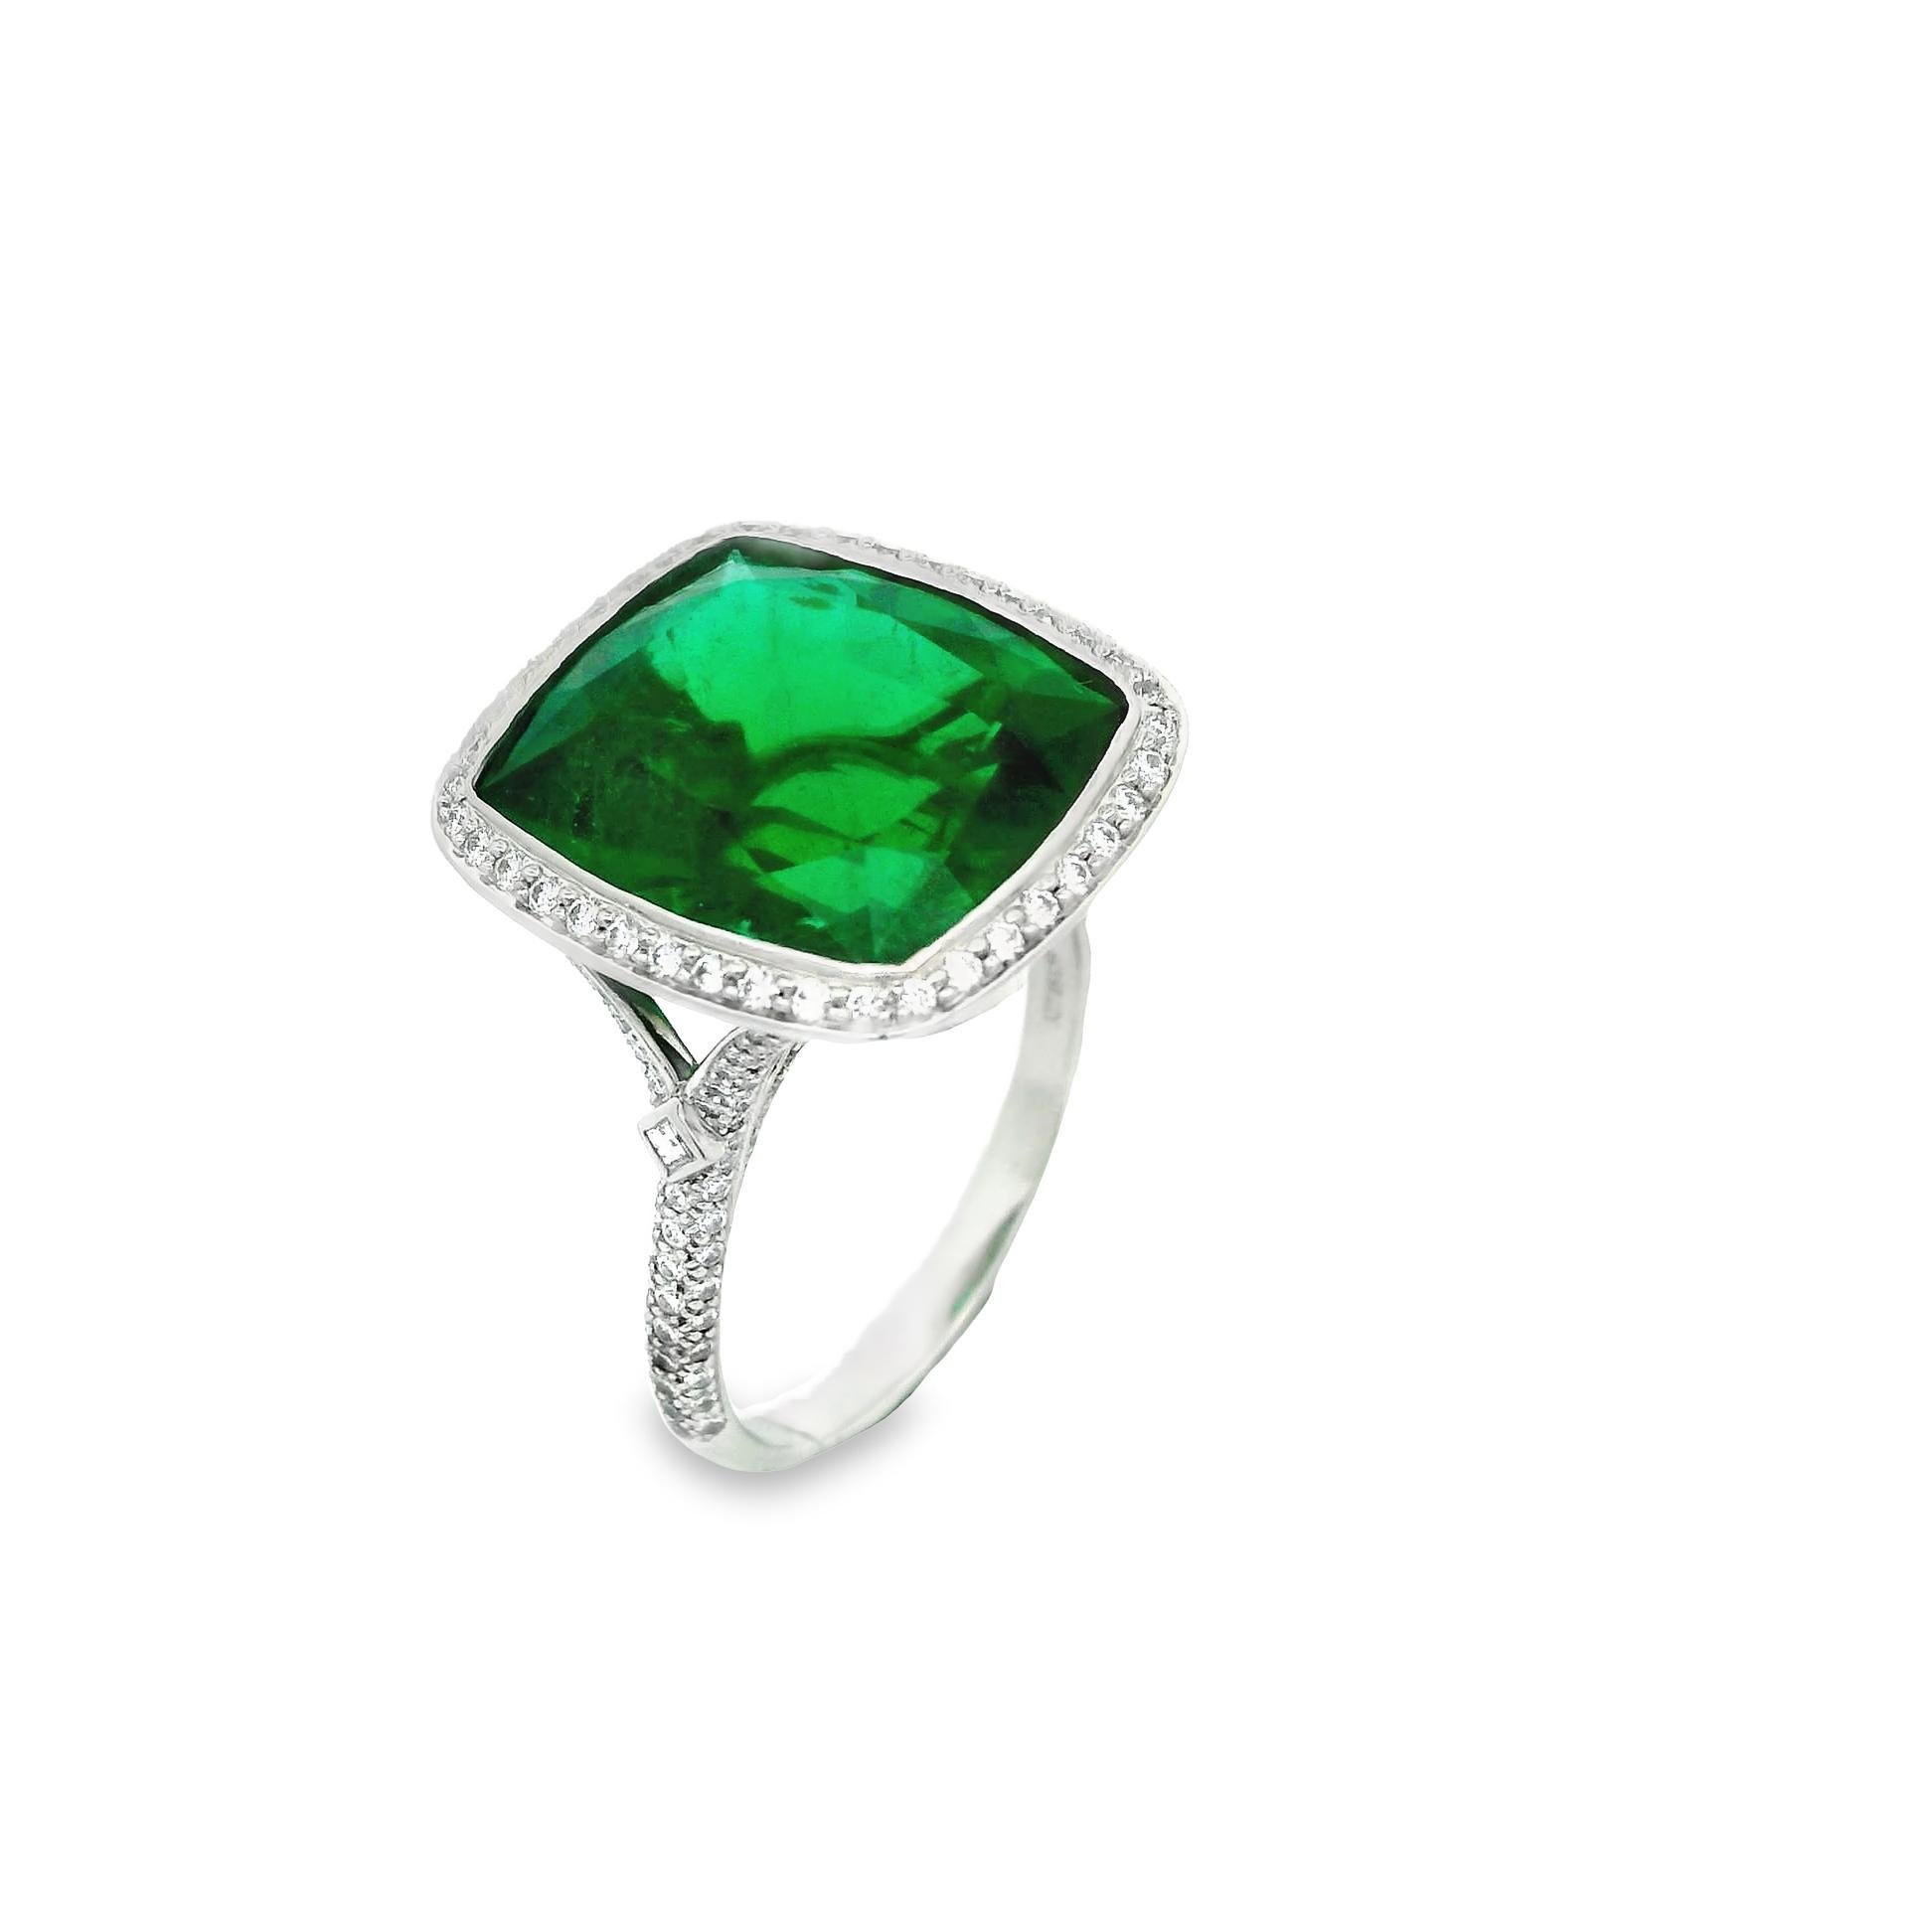 A simply amazing emerald ring by famed jewelers Tiffany & Co. The cushion-shaped gem emerald weighs 9.41 carats and has an intense vivid green color that rivals any other emerald you put in front of it. It is accented by 0.63 carats of fine round